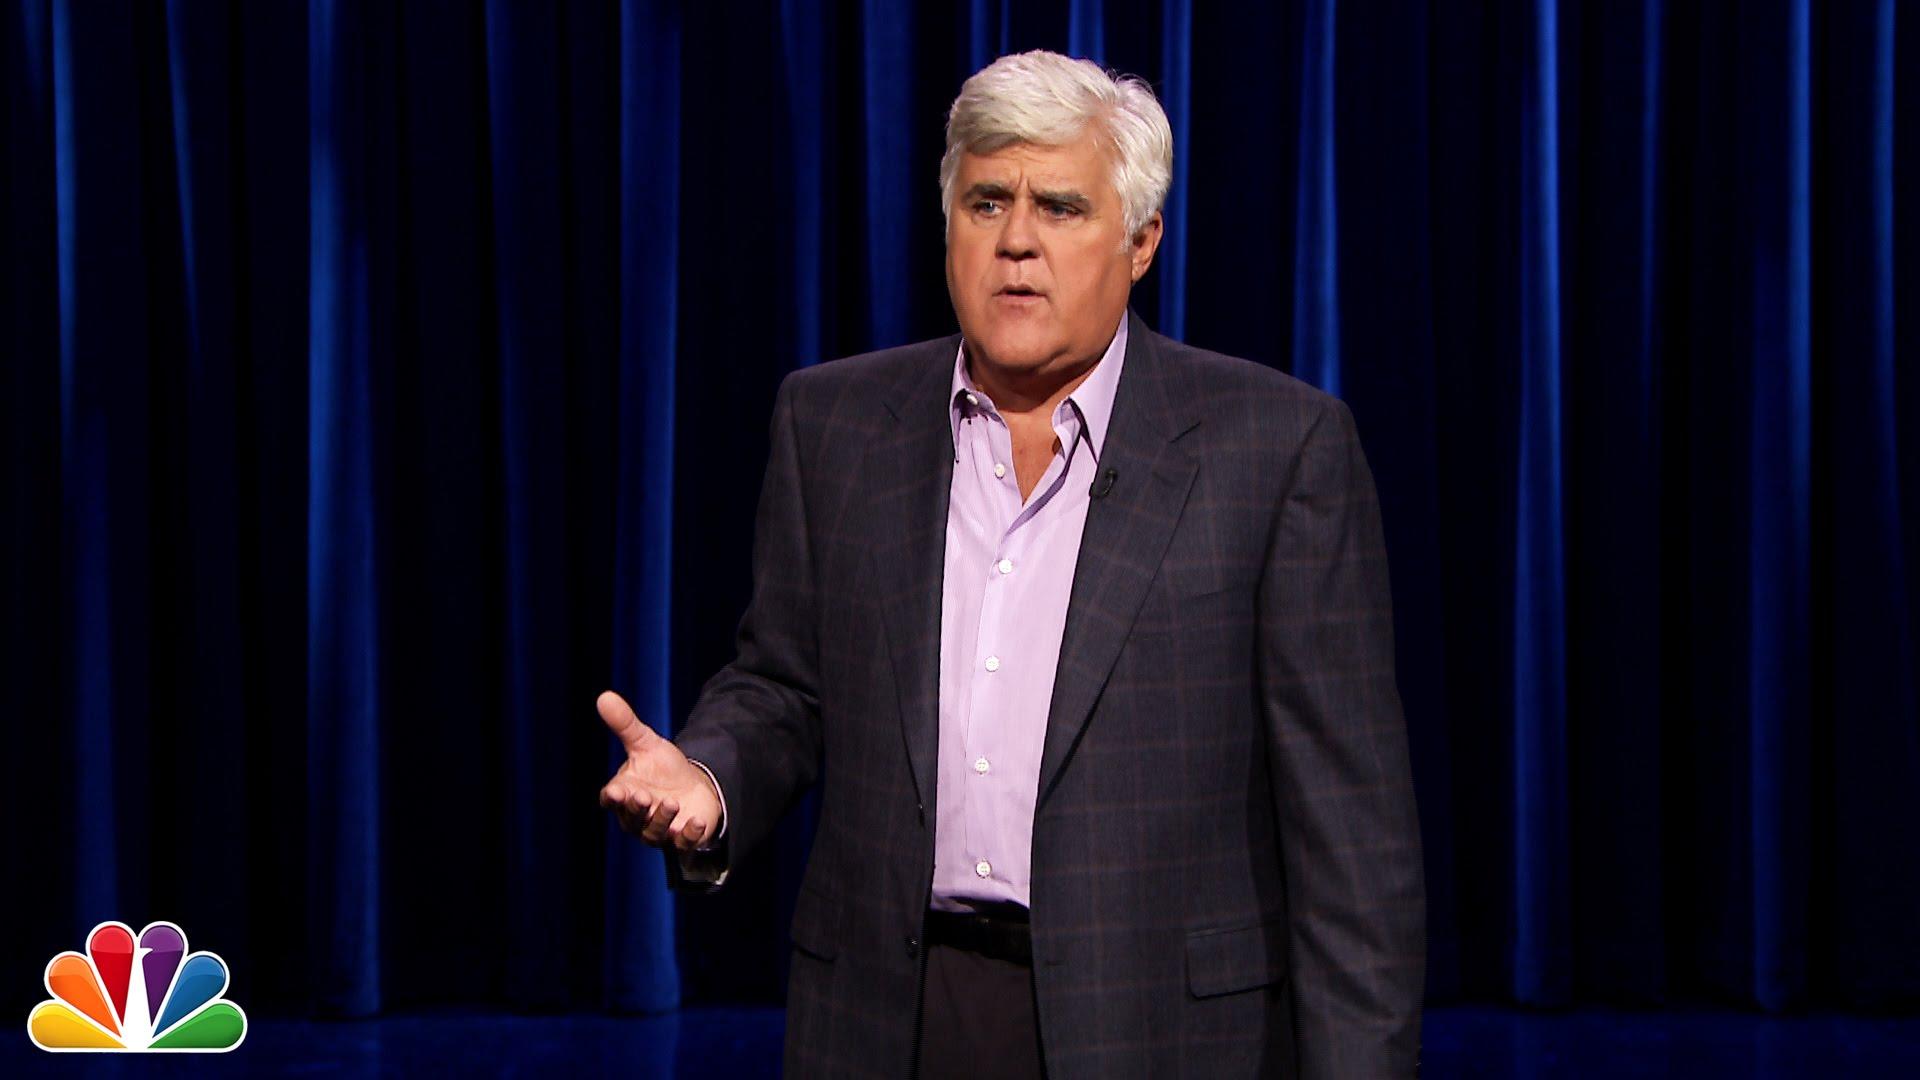 Jay Leno to perform at King Center For The Performing Arts